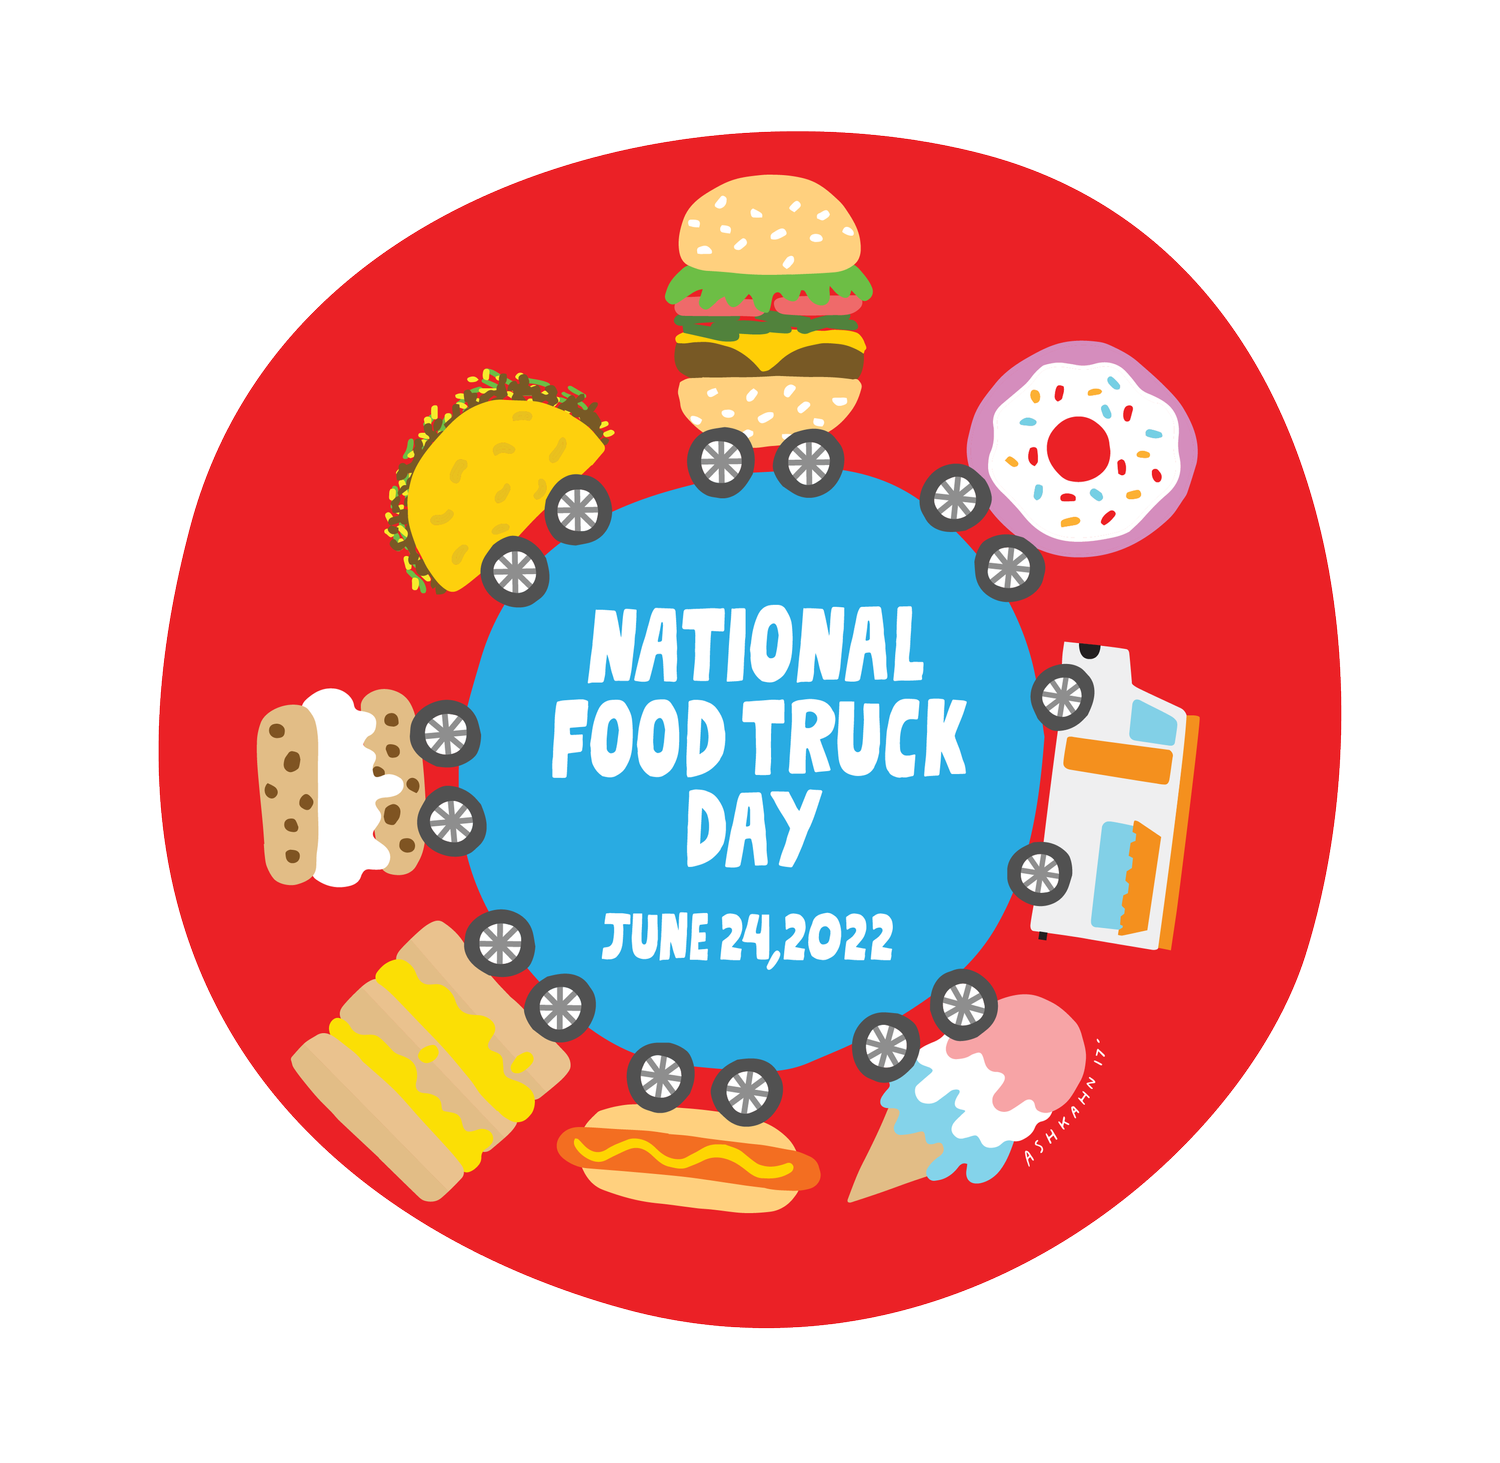 National Food Truck Day